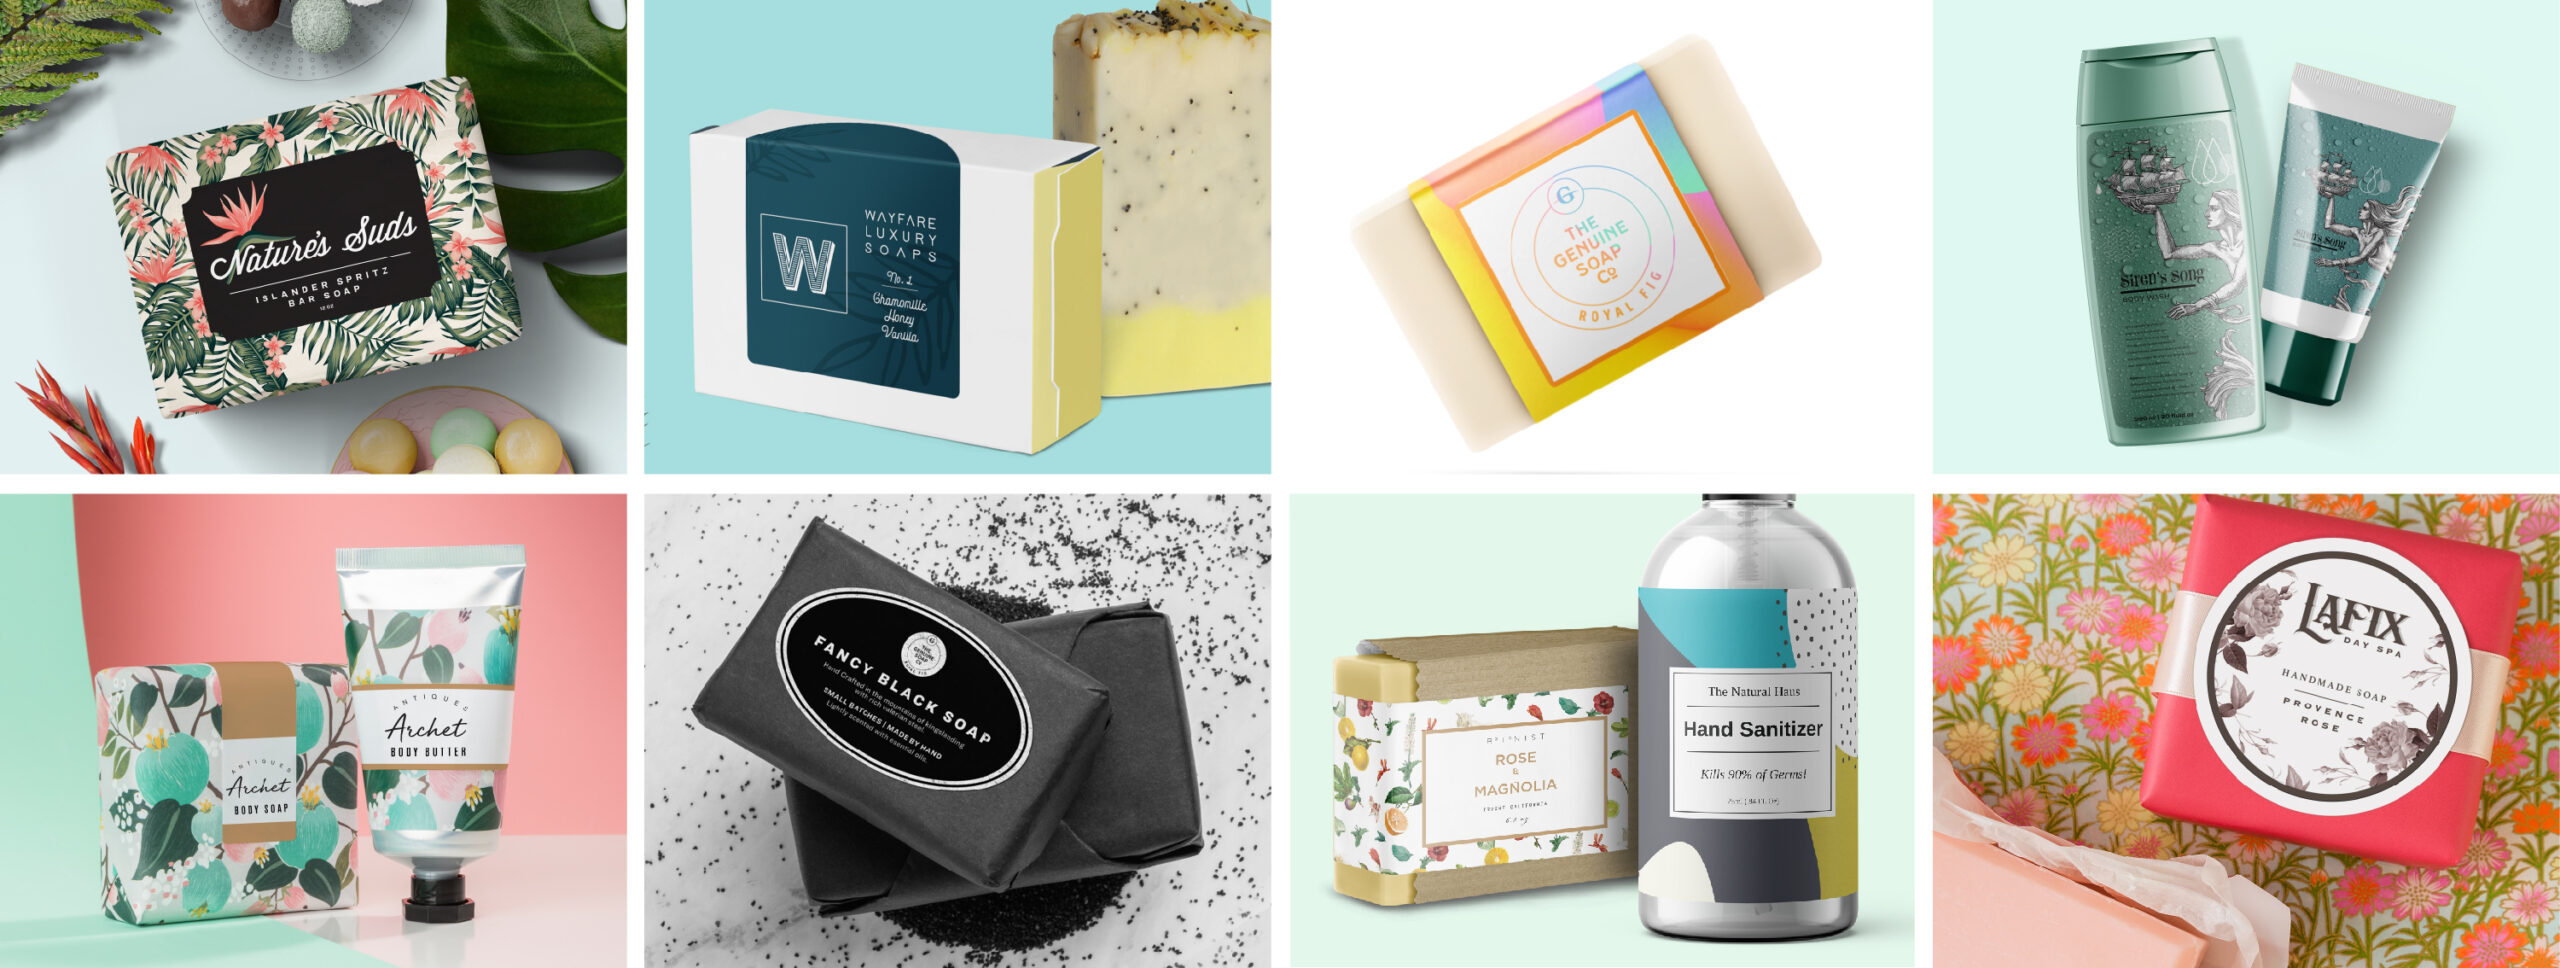 How To Make Catchy Soap Labels in a Few Easy Steps